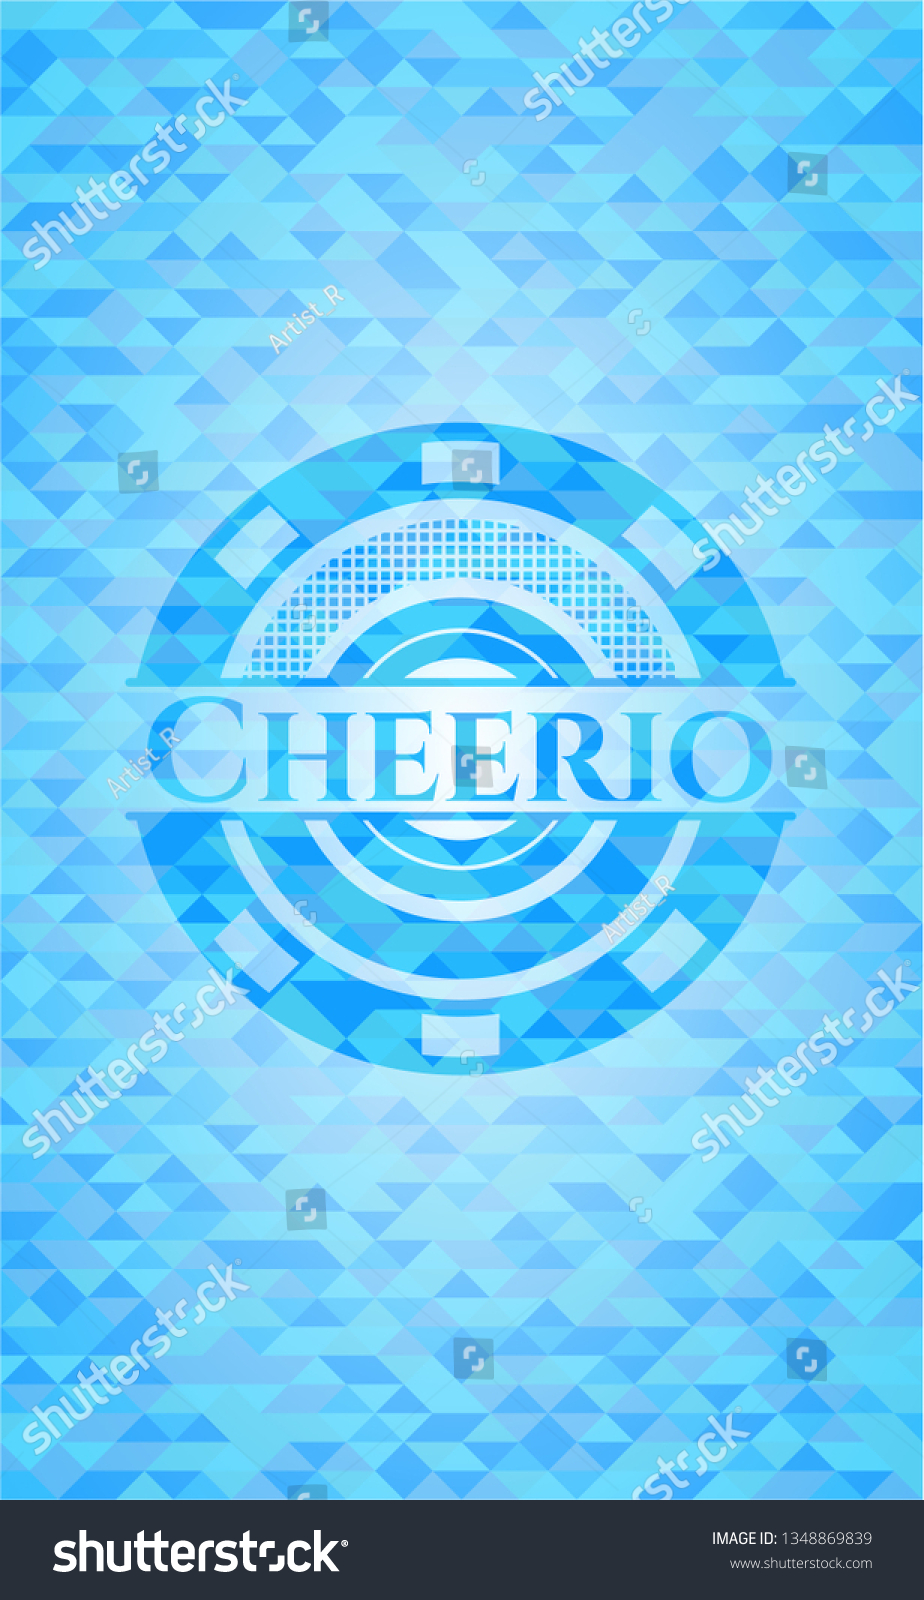 SVG of Cheerio light blue emblem with triangle mosaic background svg